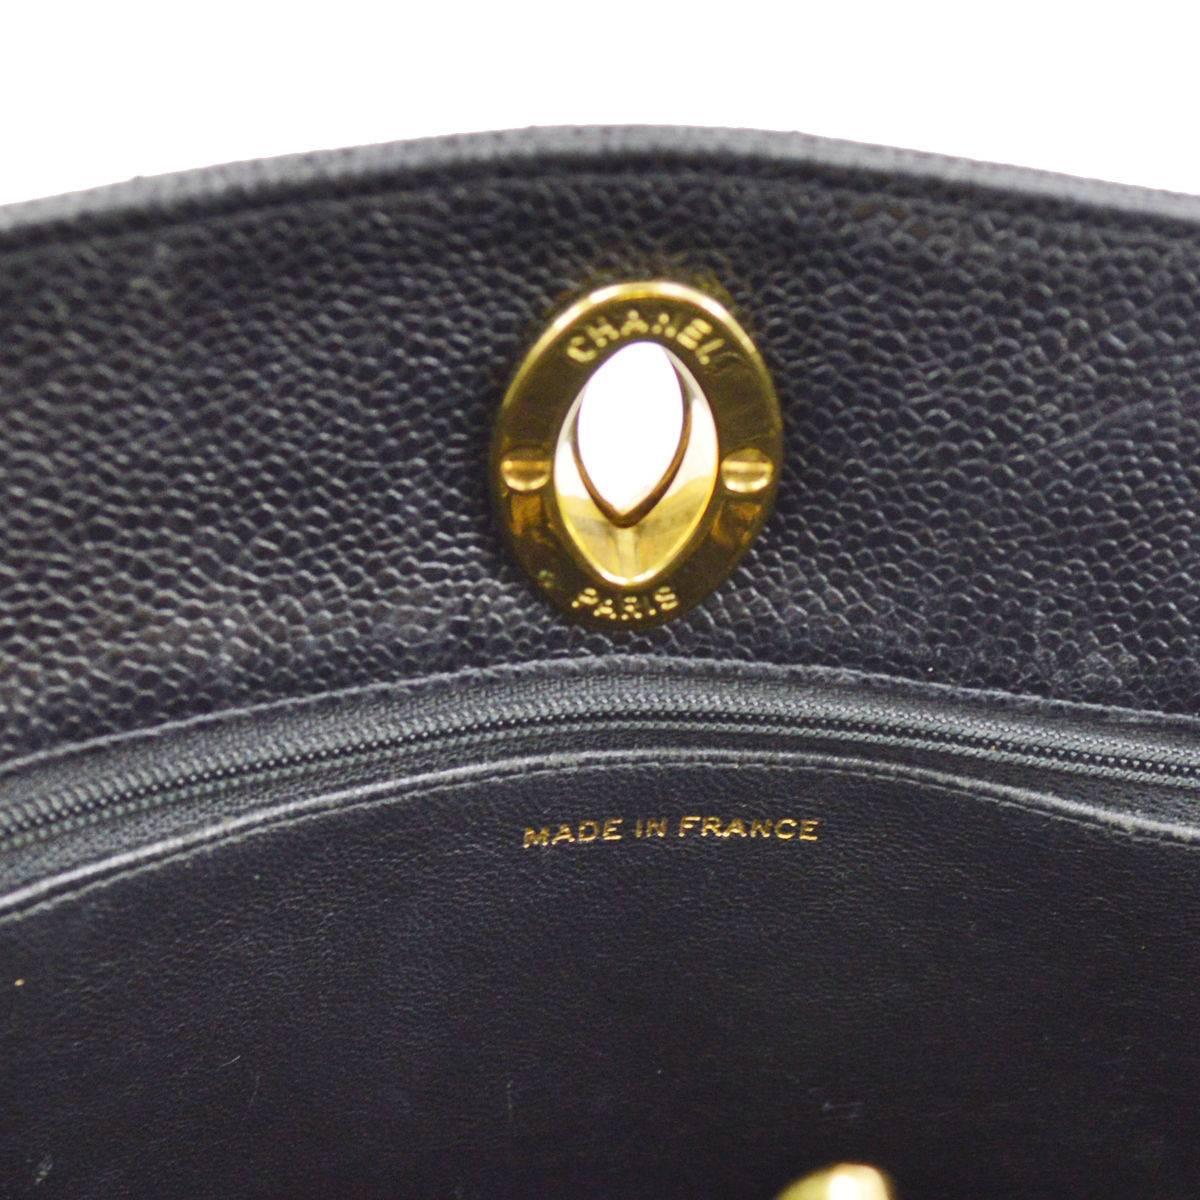 Chanel Rare Black Caviar Quilted Gold Shopper Carryall Tote Shoulder Bag 4